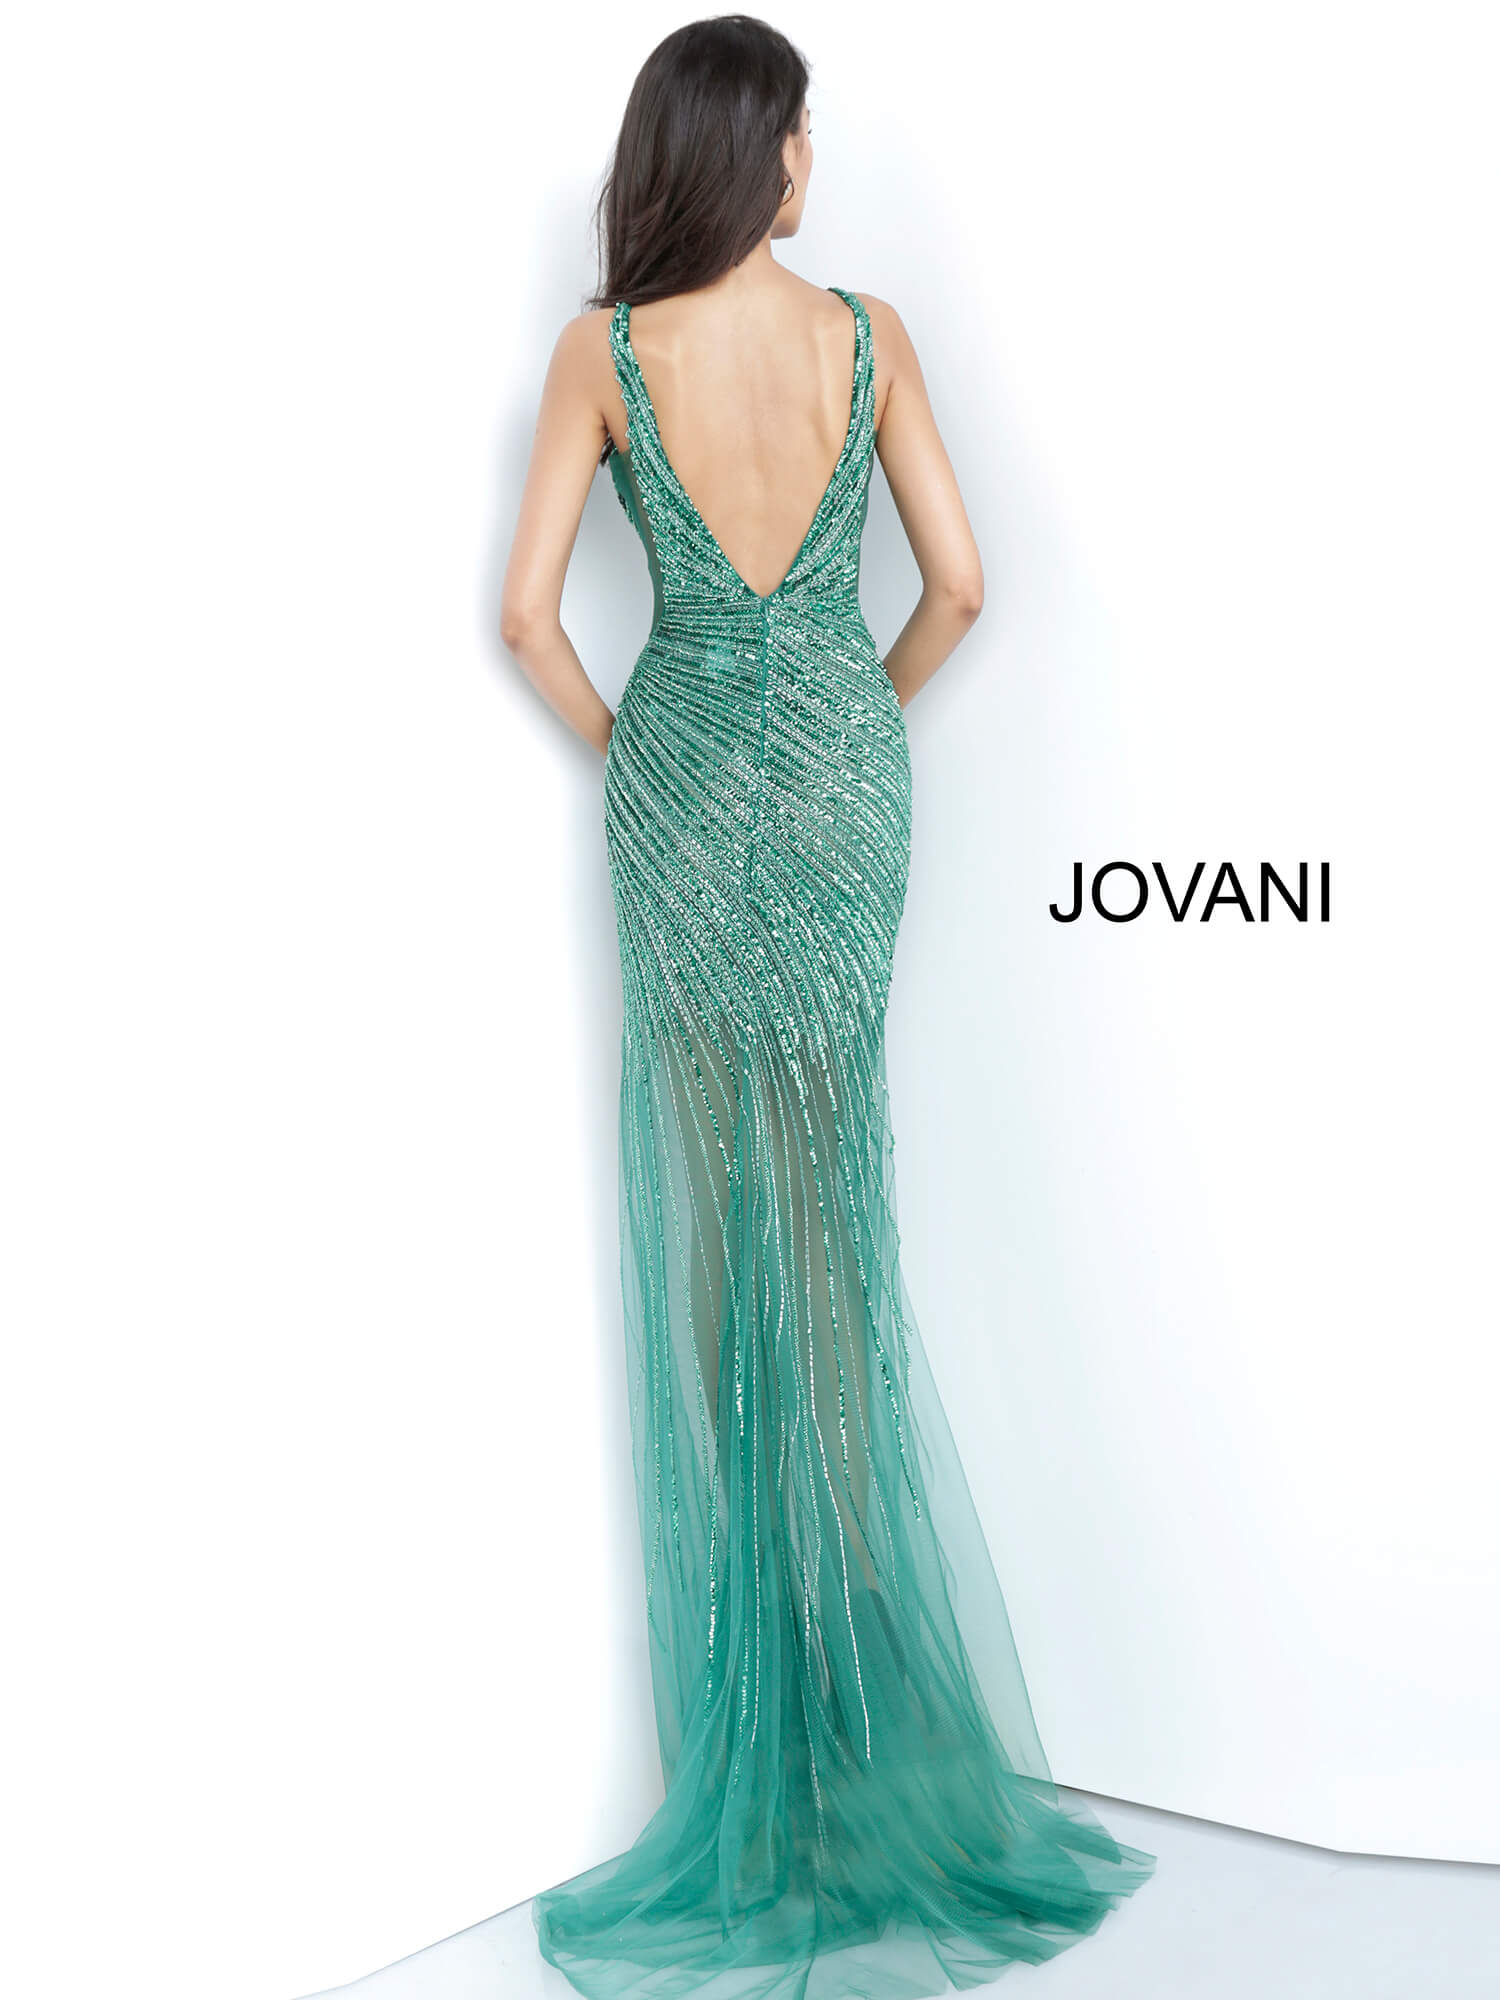 Jovani 63405 Sheer High Low Side Slit Beaded Formal Dress Prom Pageant Gown fully beaded long prom dress with low v-neckline, sleeveless fitted bodice, sheer side panels and v-back, floor length fitted sheer skirt with high open side slit. Glass Slipper Formals